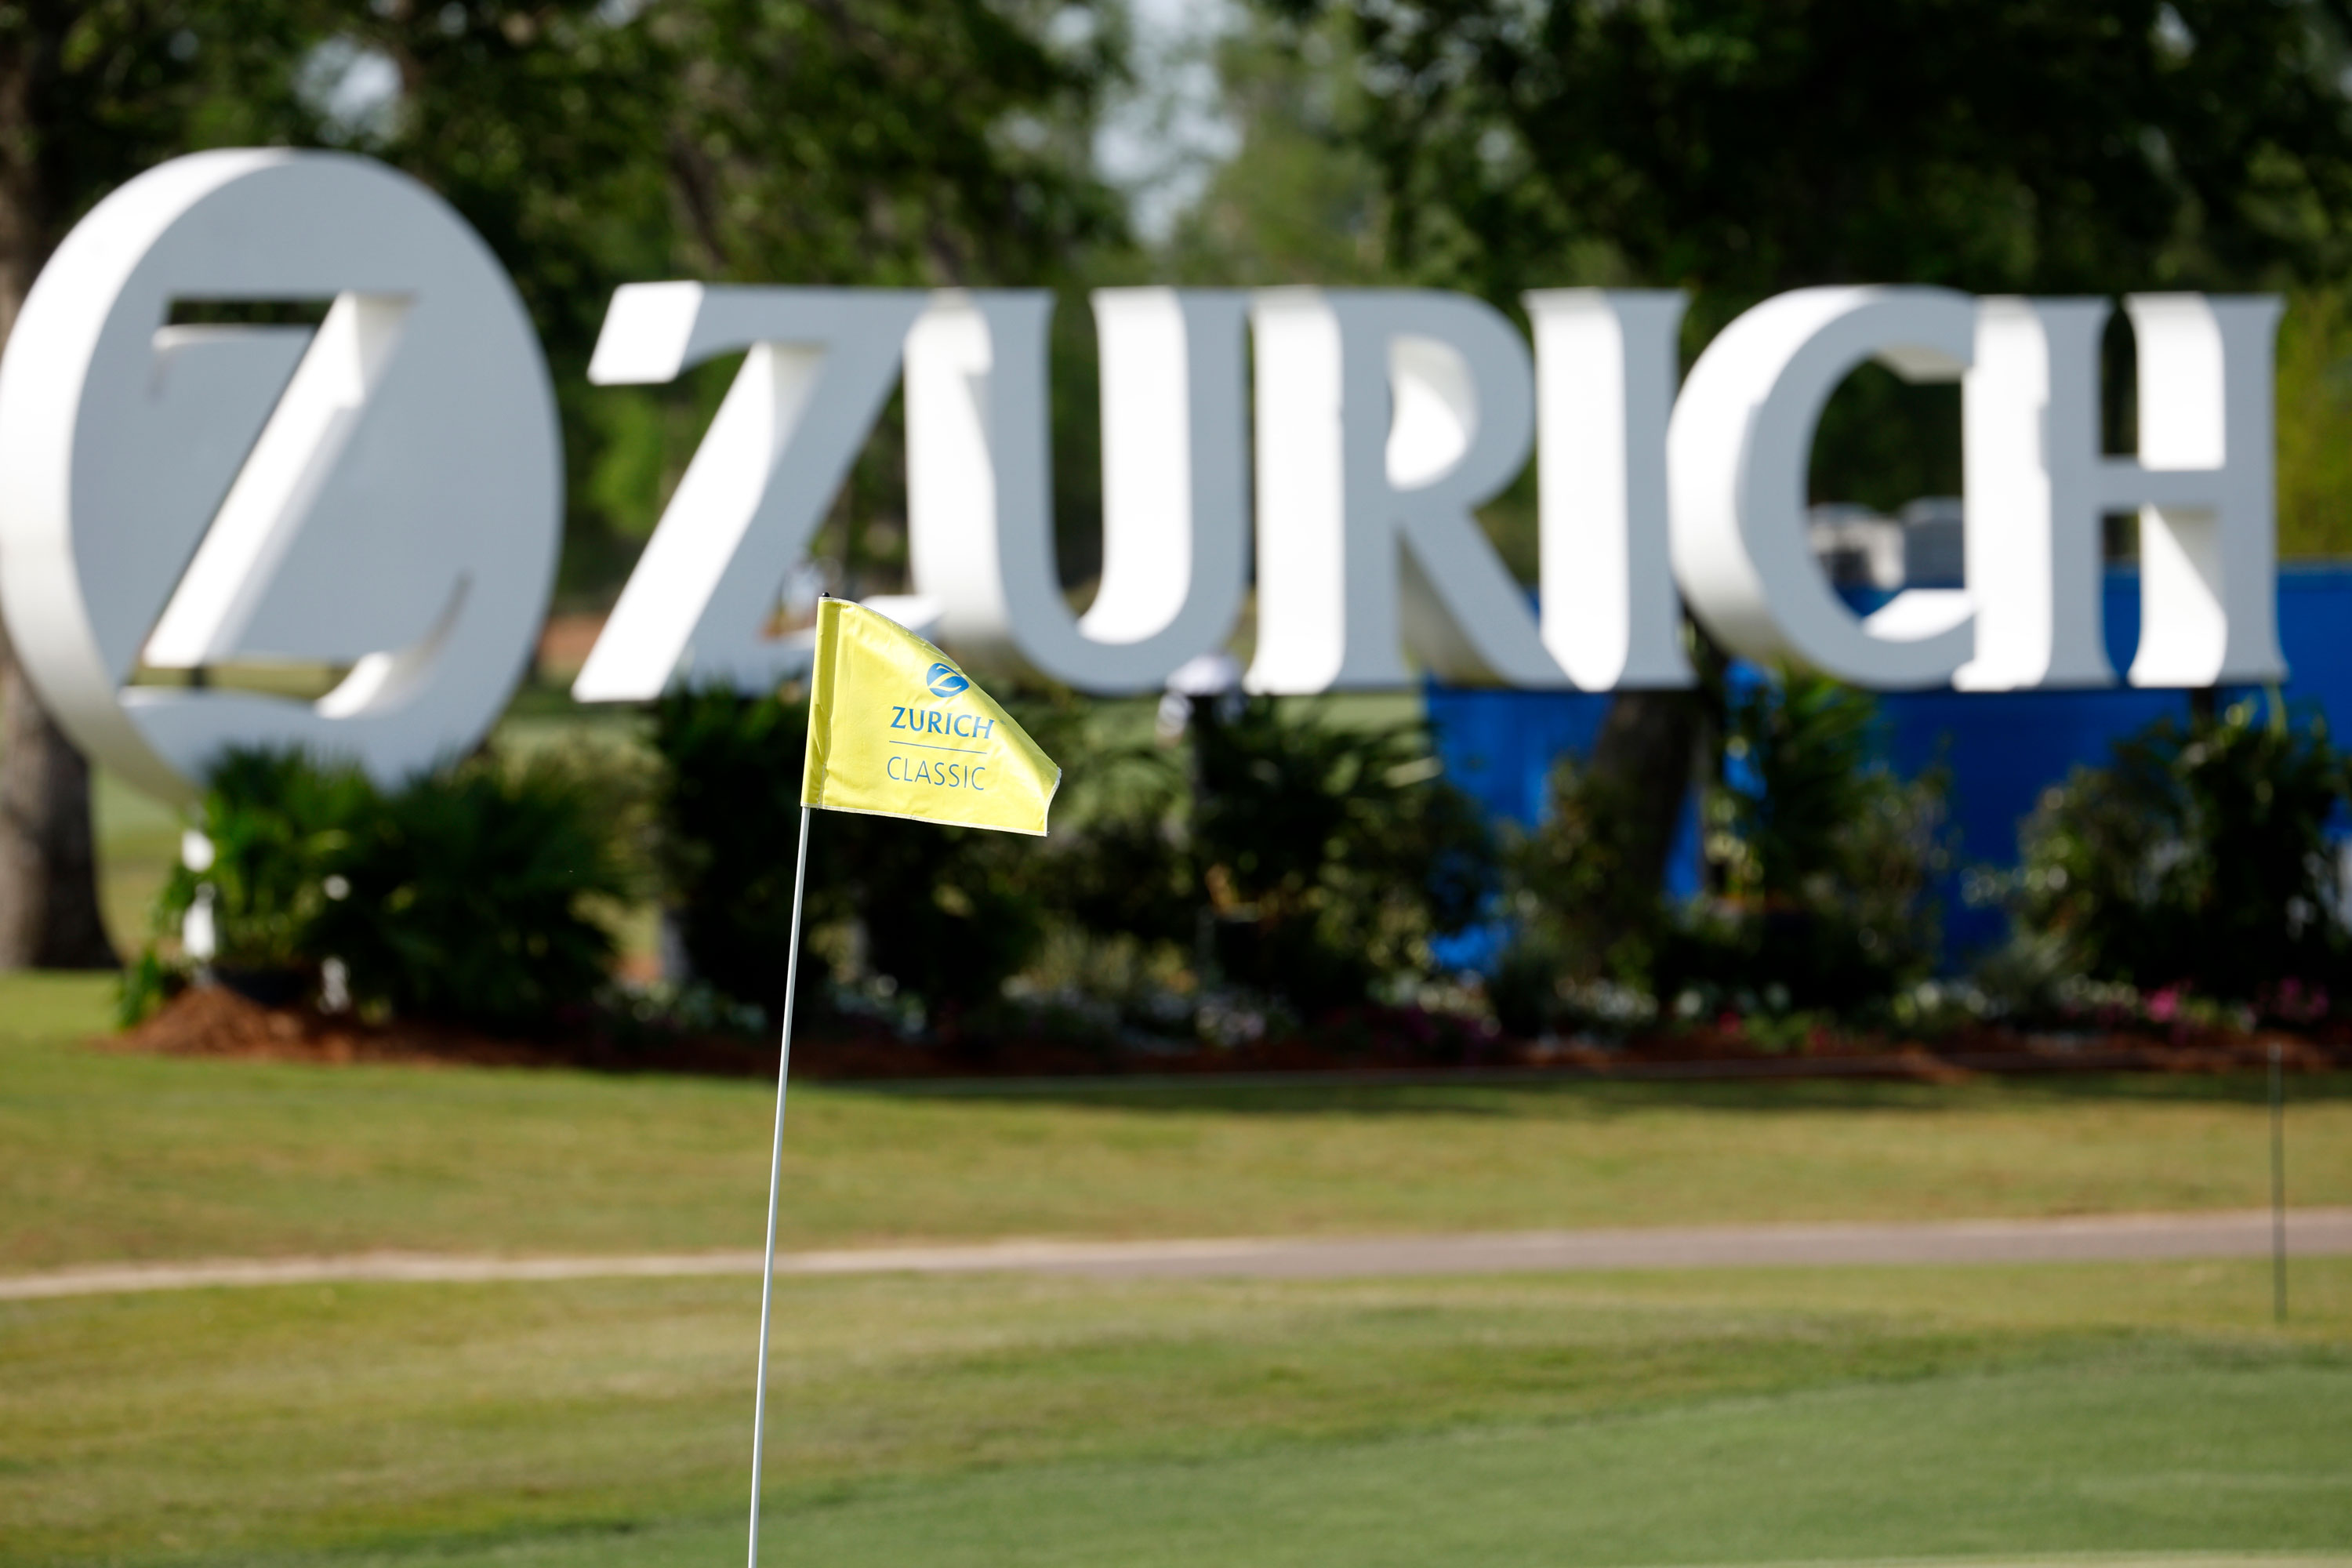 Zurich classic 2022 shure beta 87a replacement parts